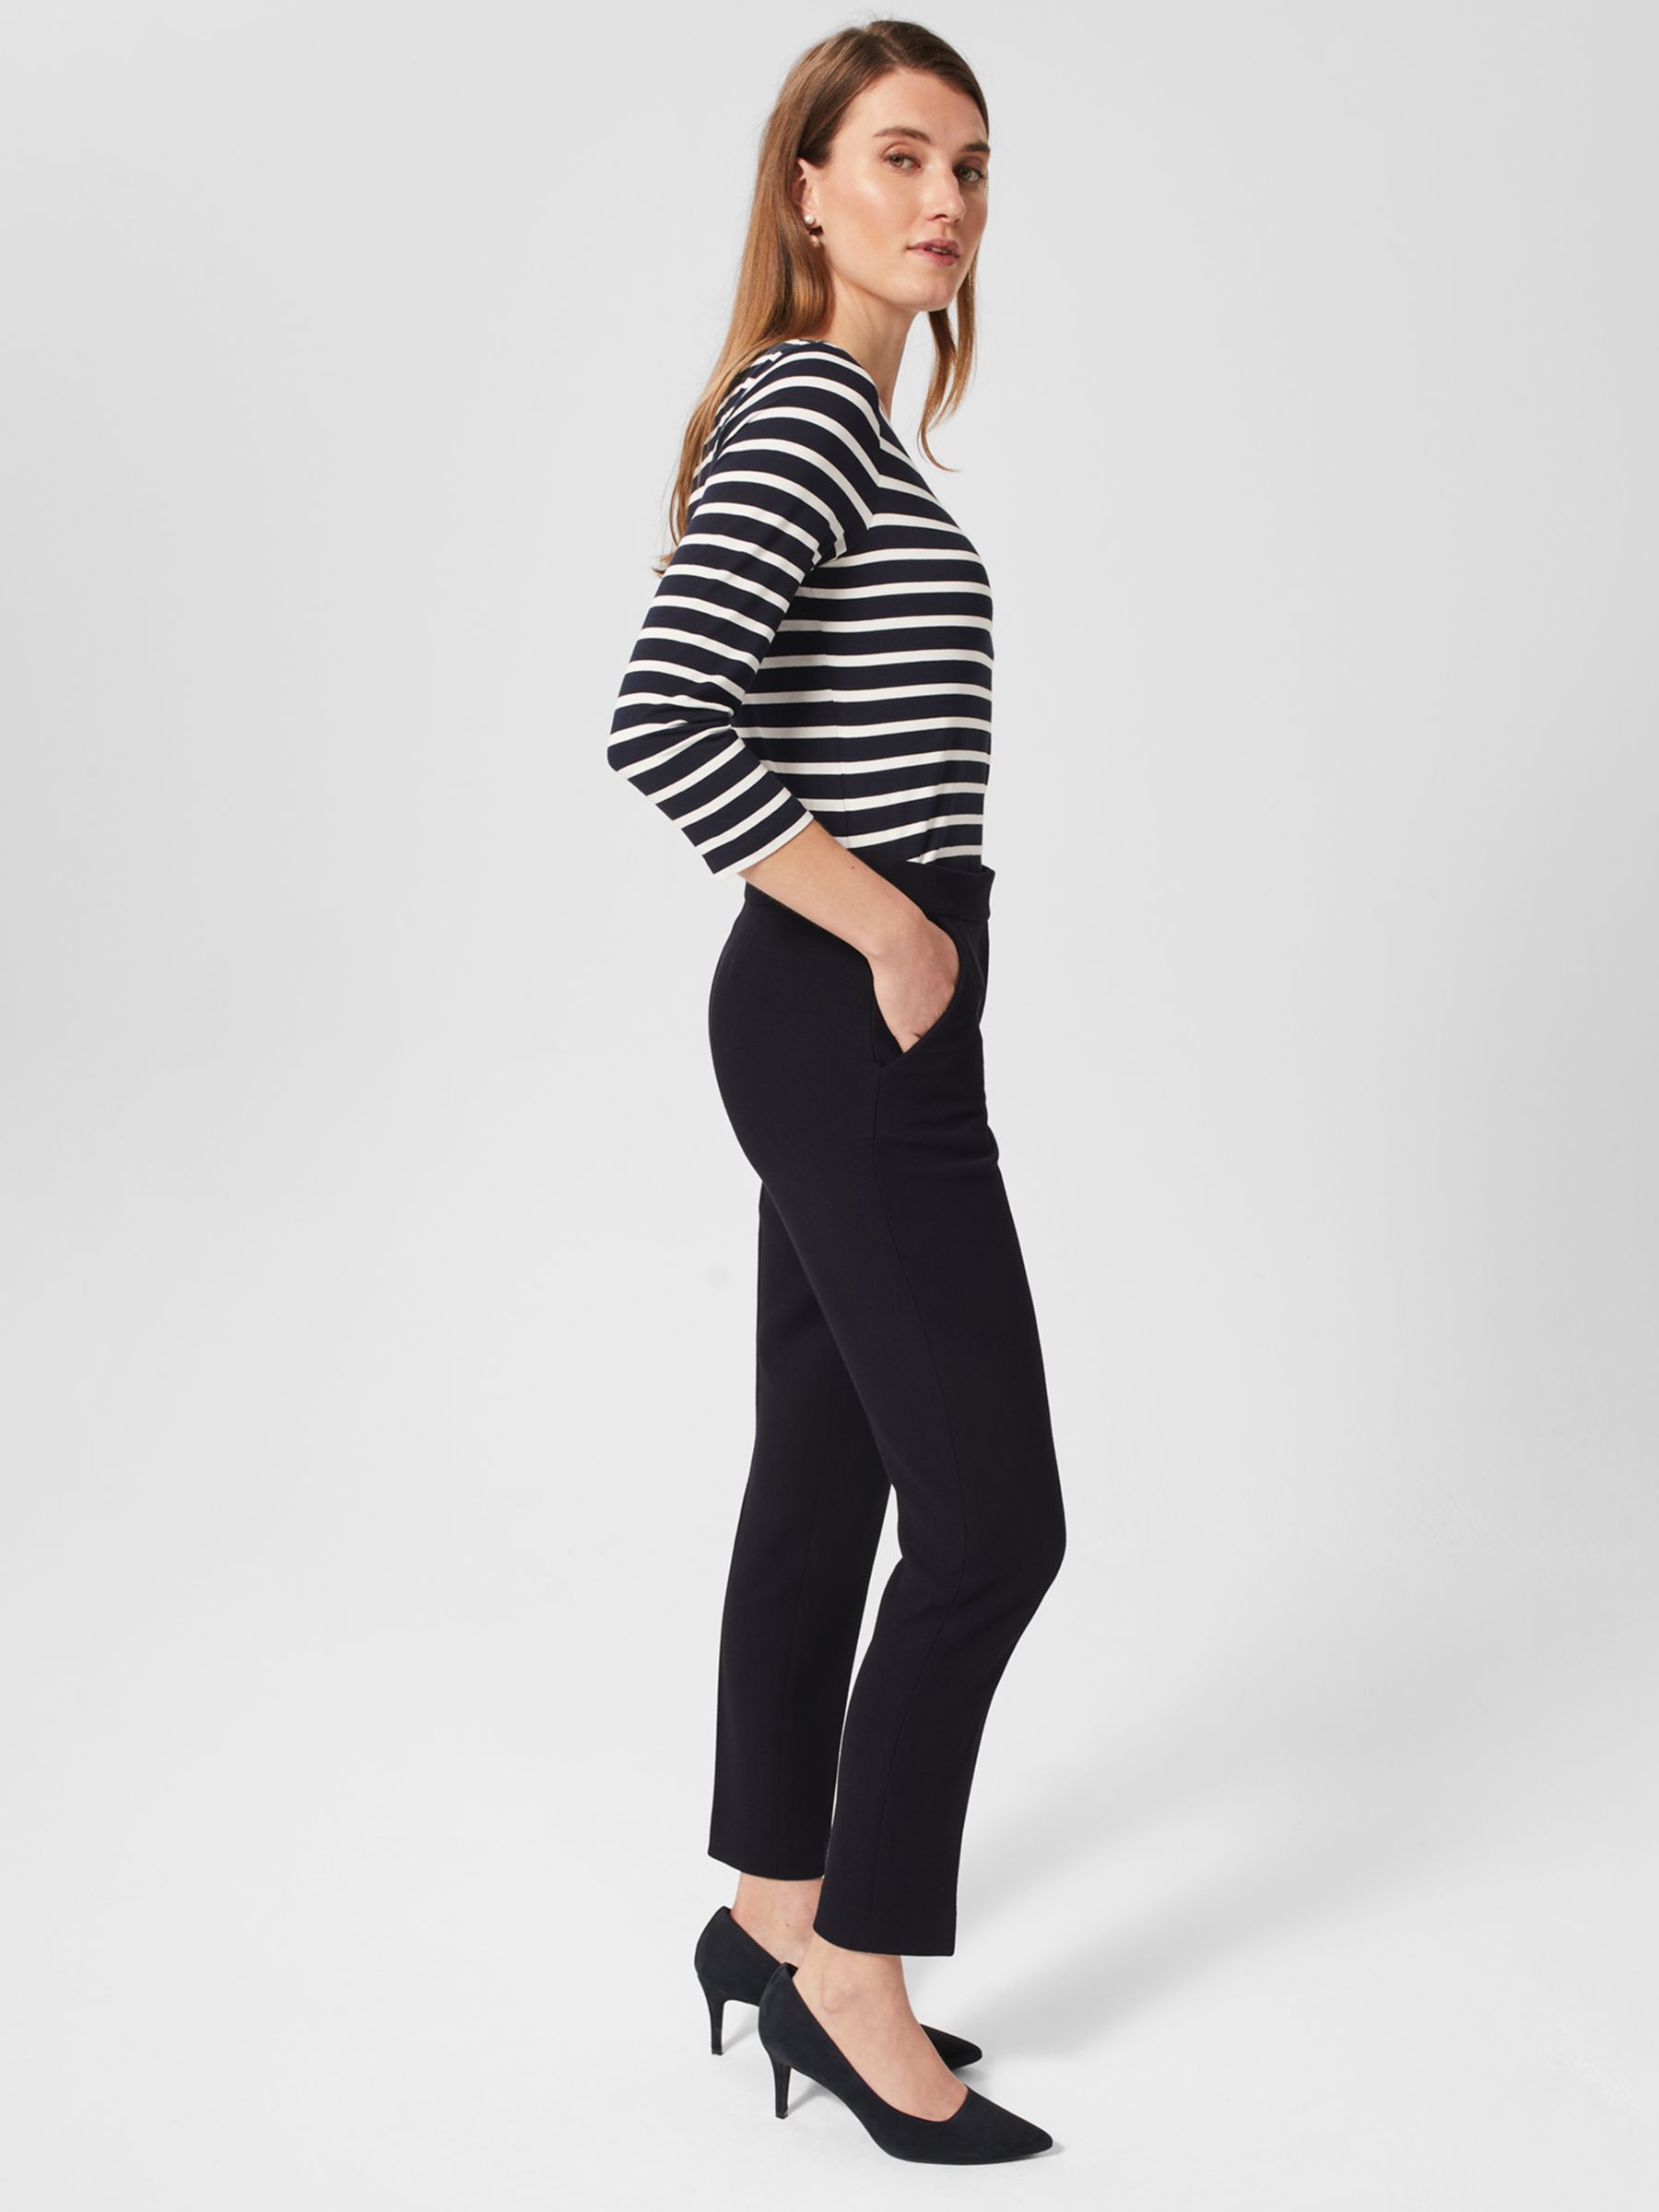 Buy Hobbs Mia Tapered Ankle Grazer Trousers, Navy Online at johnlewis.com